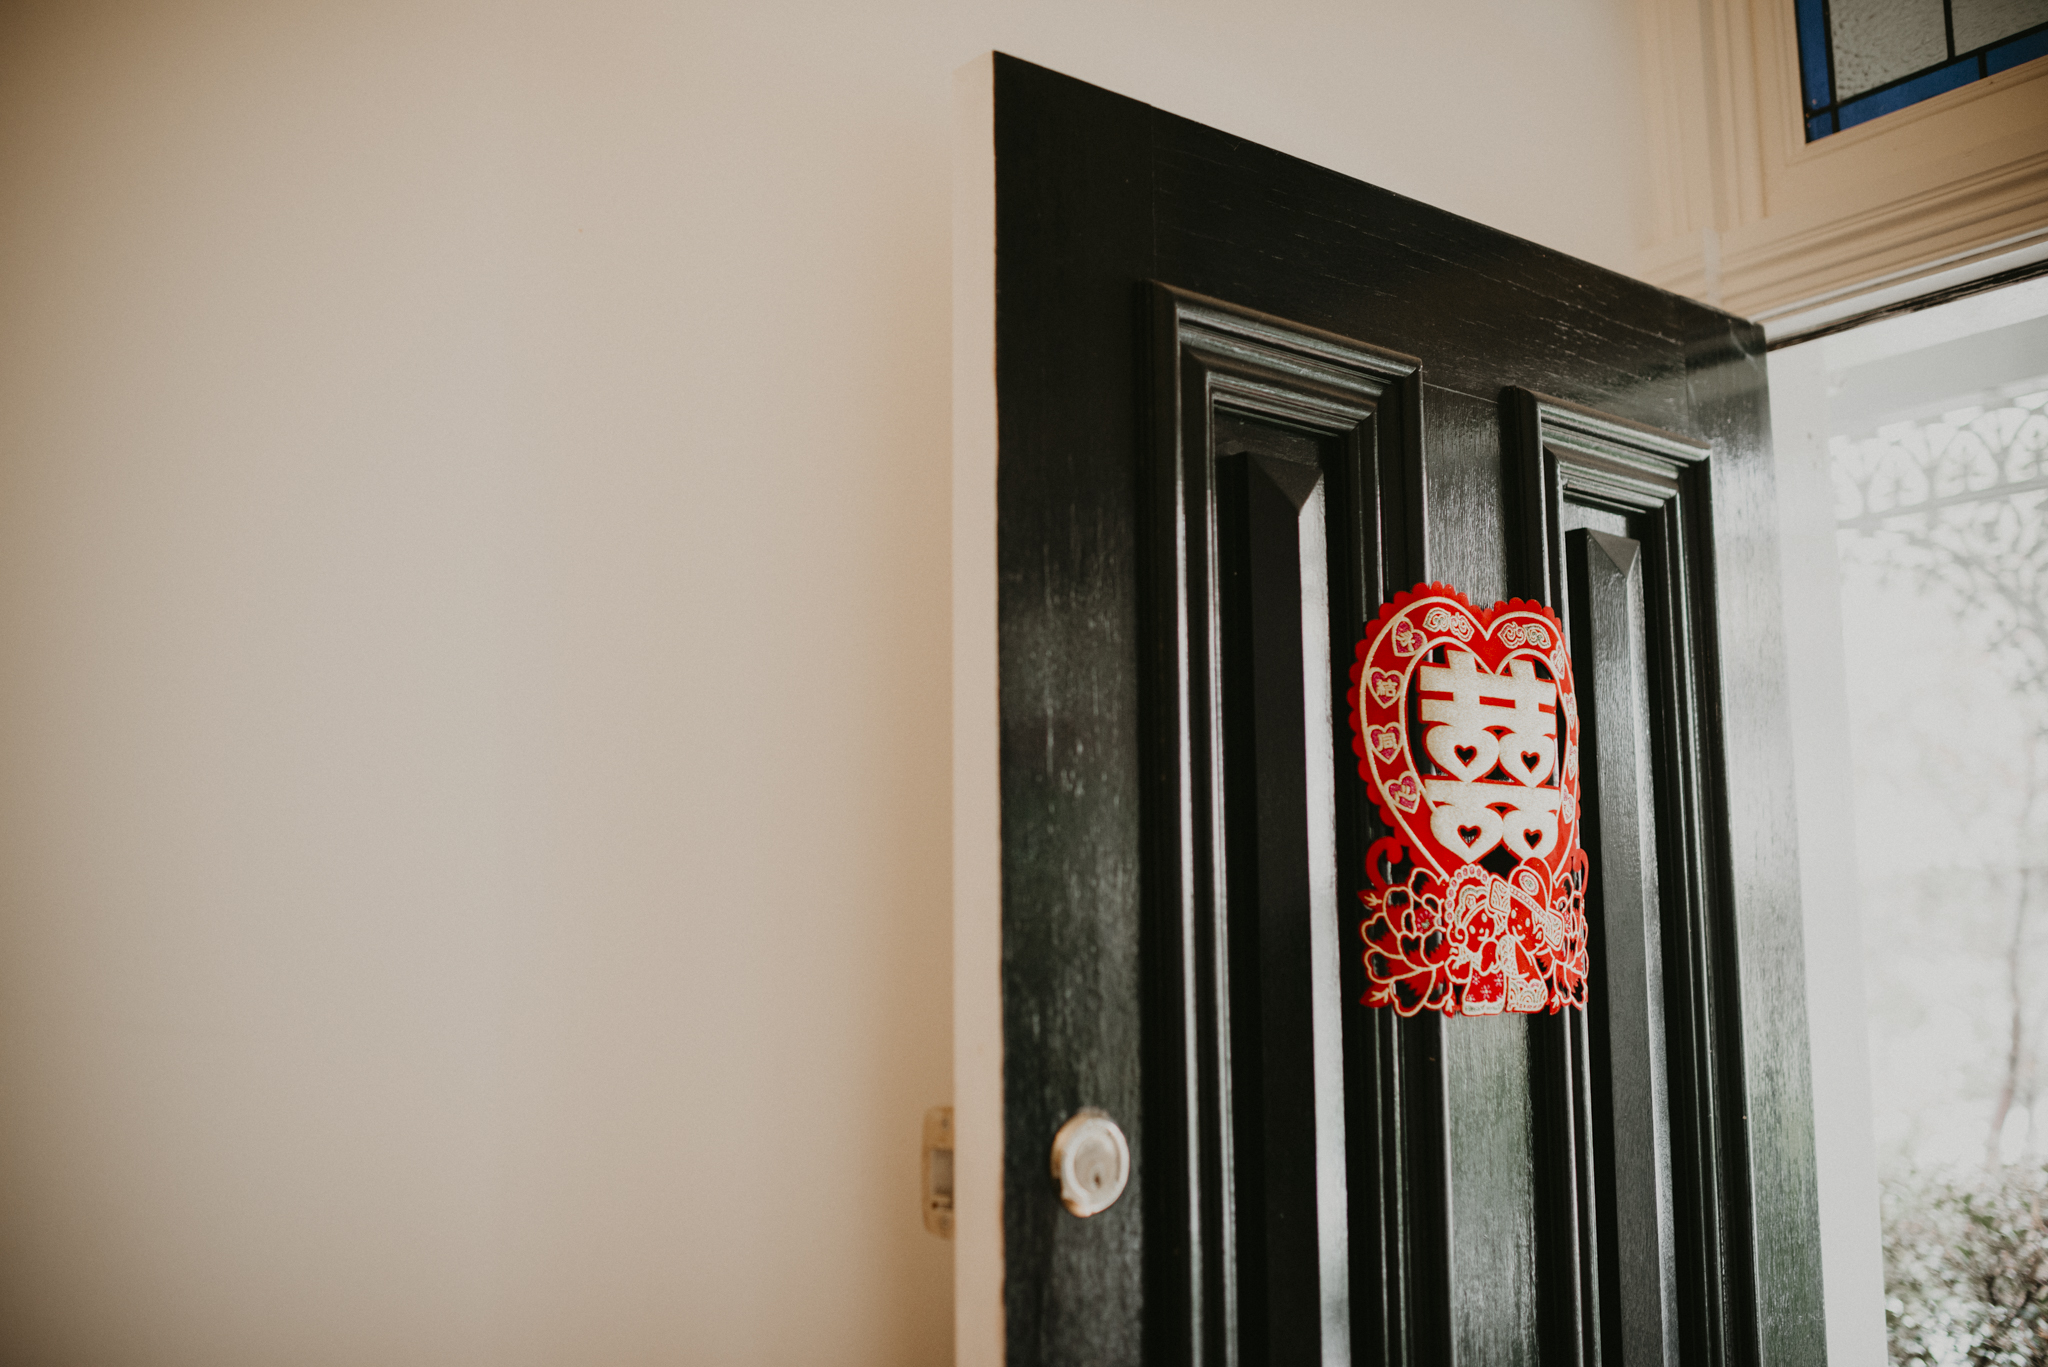 agnes-duy-15th-december-2018-chinese-vietnamese-wedding-tea-ceremony-yarraville-home-house-documentary-candid-photographer-sarah-matler-photography-14